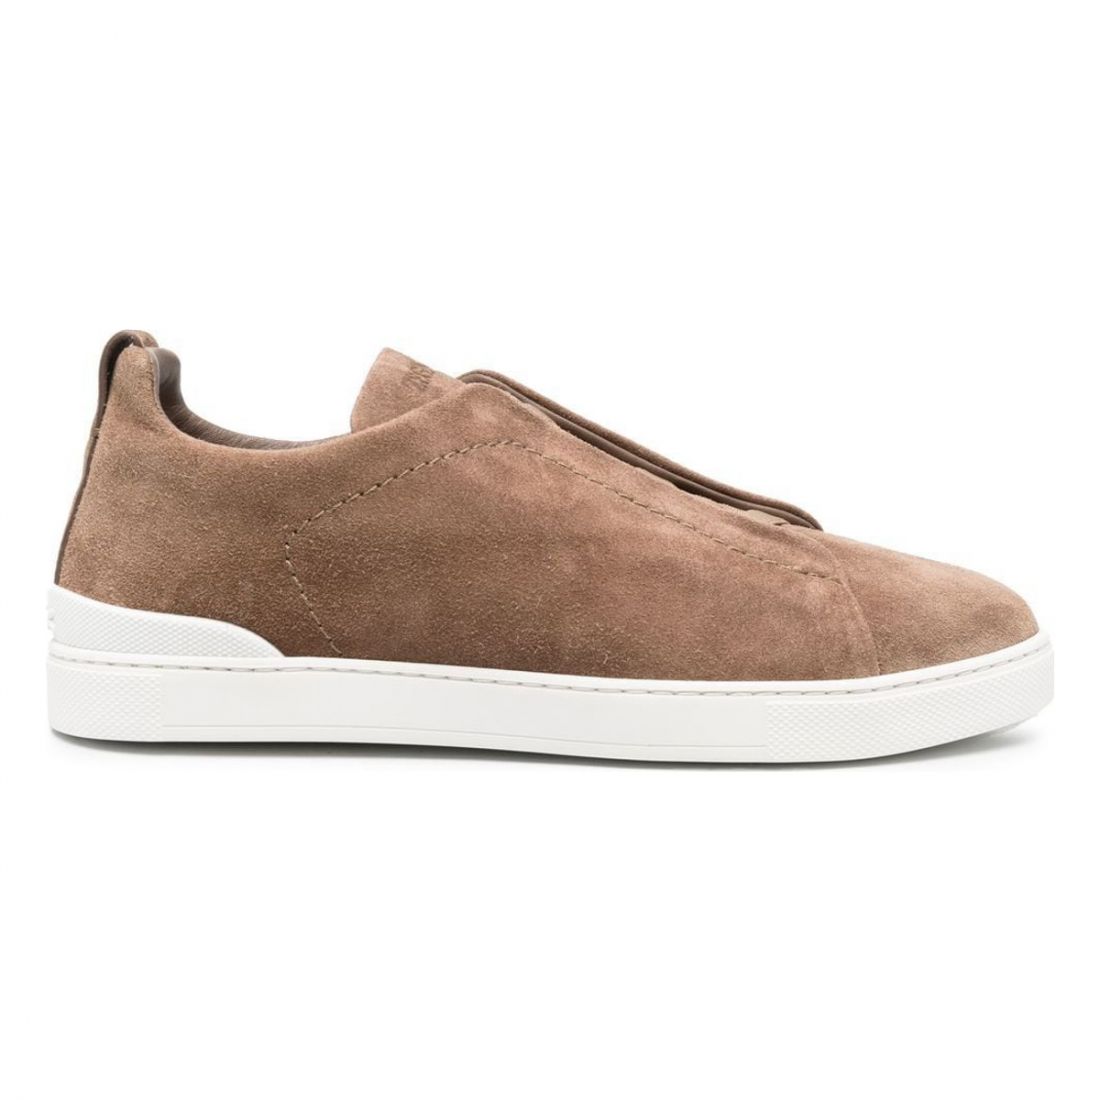 Zegna - Slip-on Sneakers 'Triple Stitch' pour Hommes